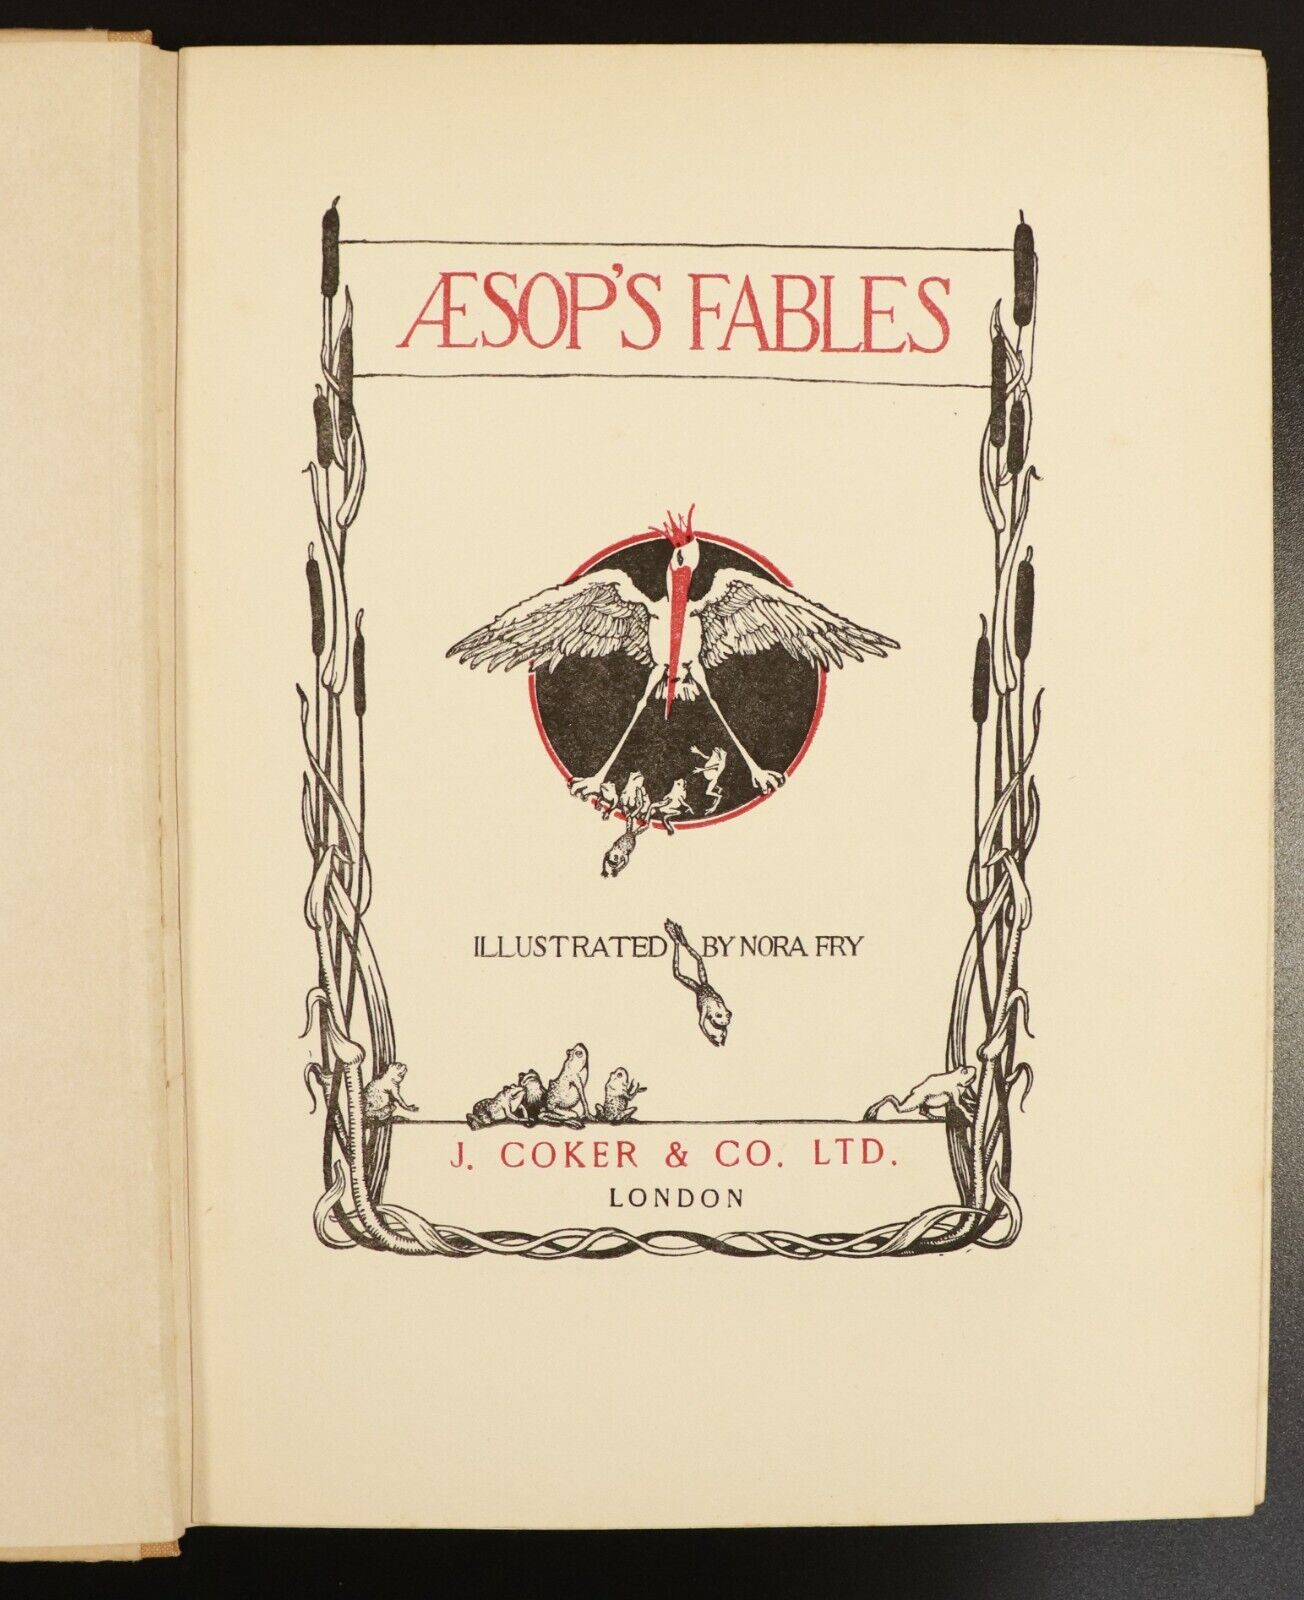 1930 Aesop's Fables Illustrated by Nora Fry Antique Childrens Book - 0